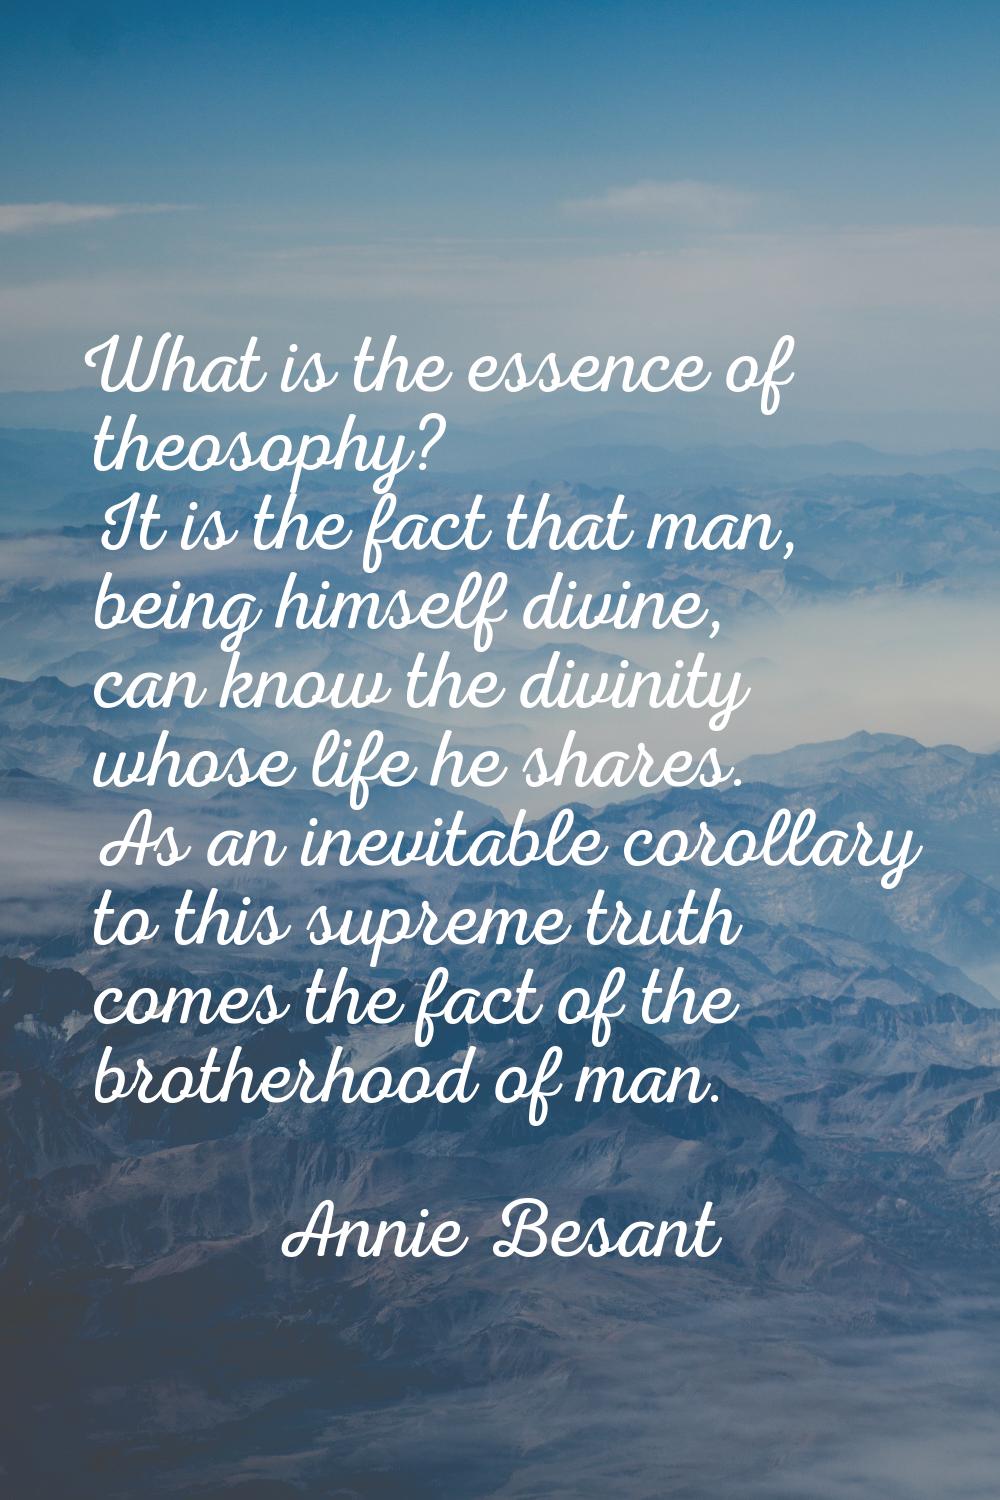 What is the essence of theosophy? It is the fact that man, being himself divine, can know the divin